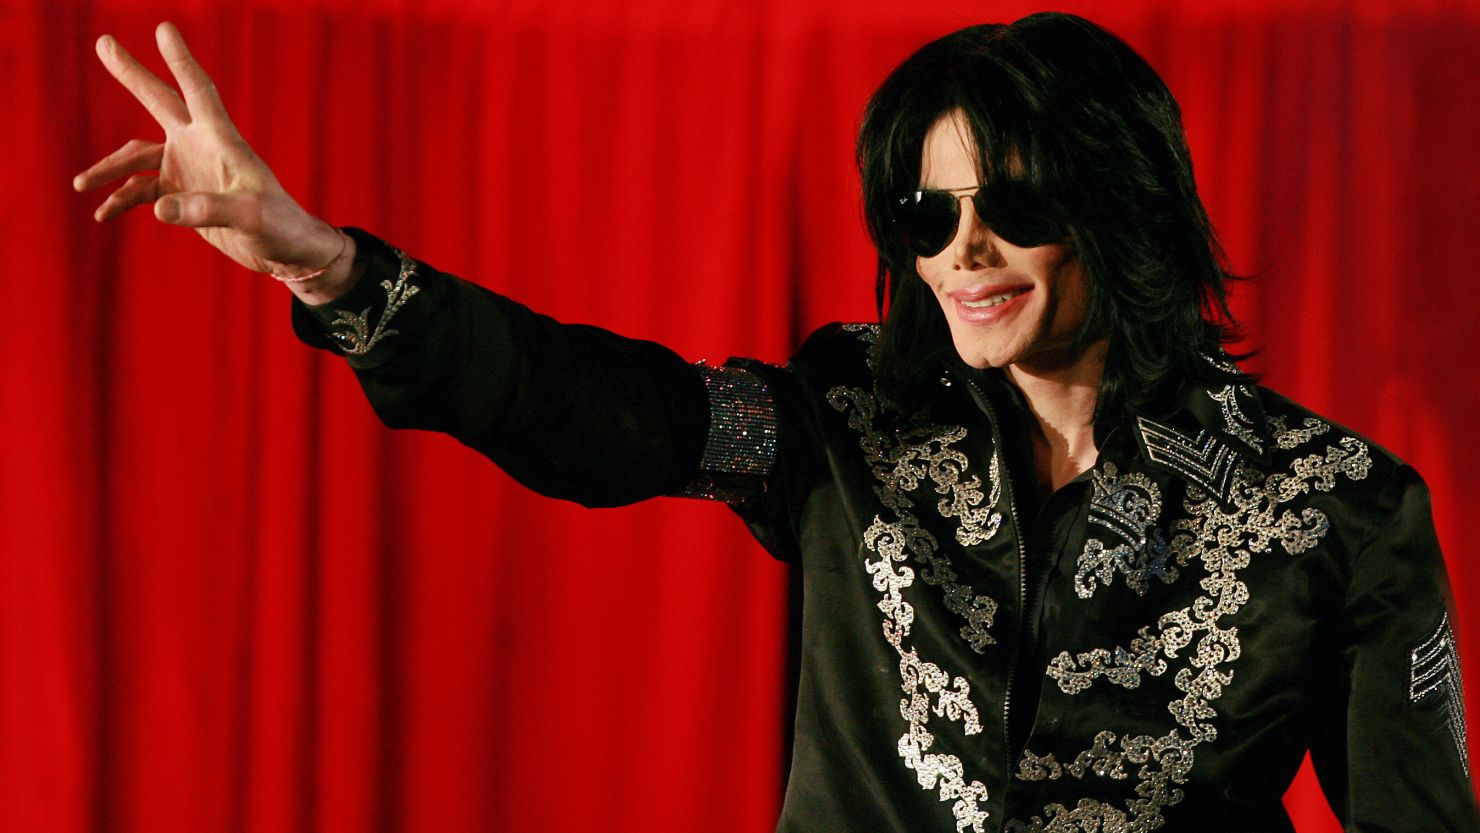 Michael Jackson's family is seeking billions in damages, equal to what the pop star might have earned had he lived.